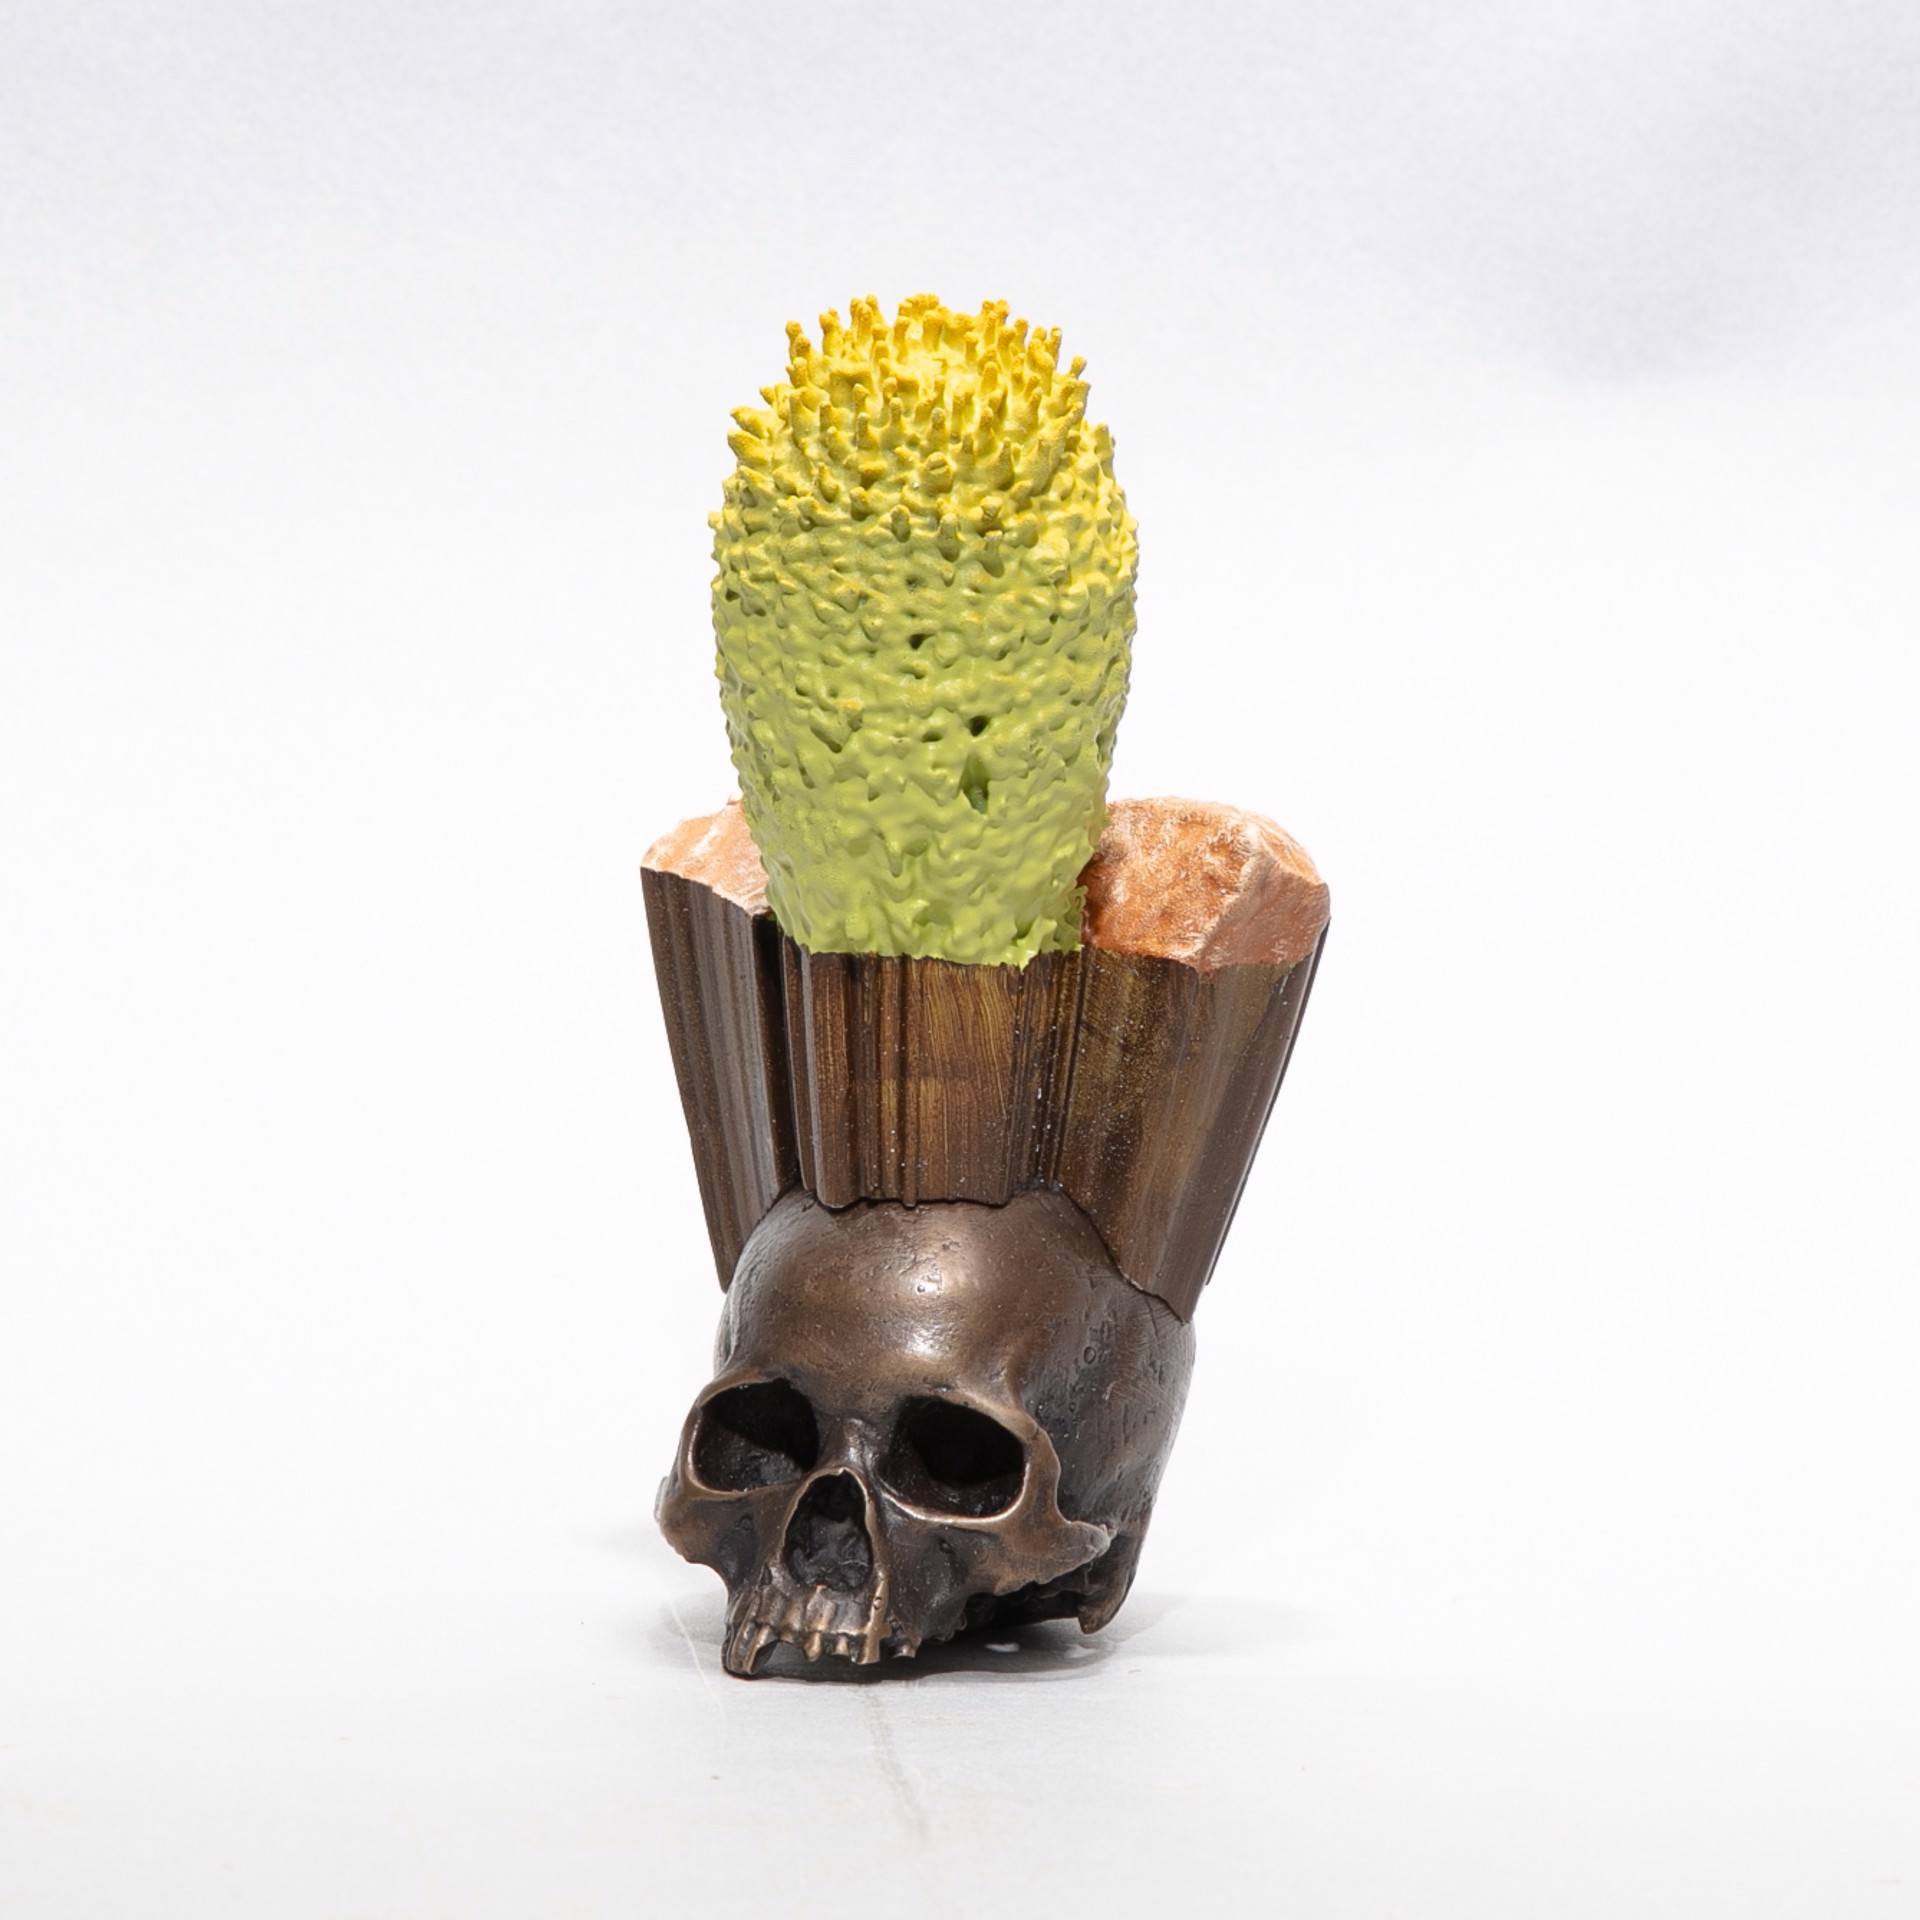 "Cactus Skull 2" by Dana Younger